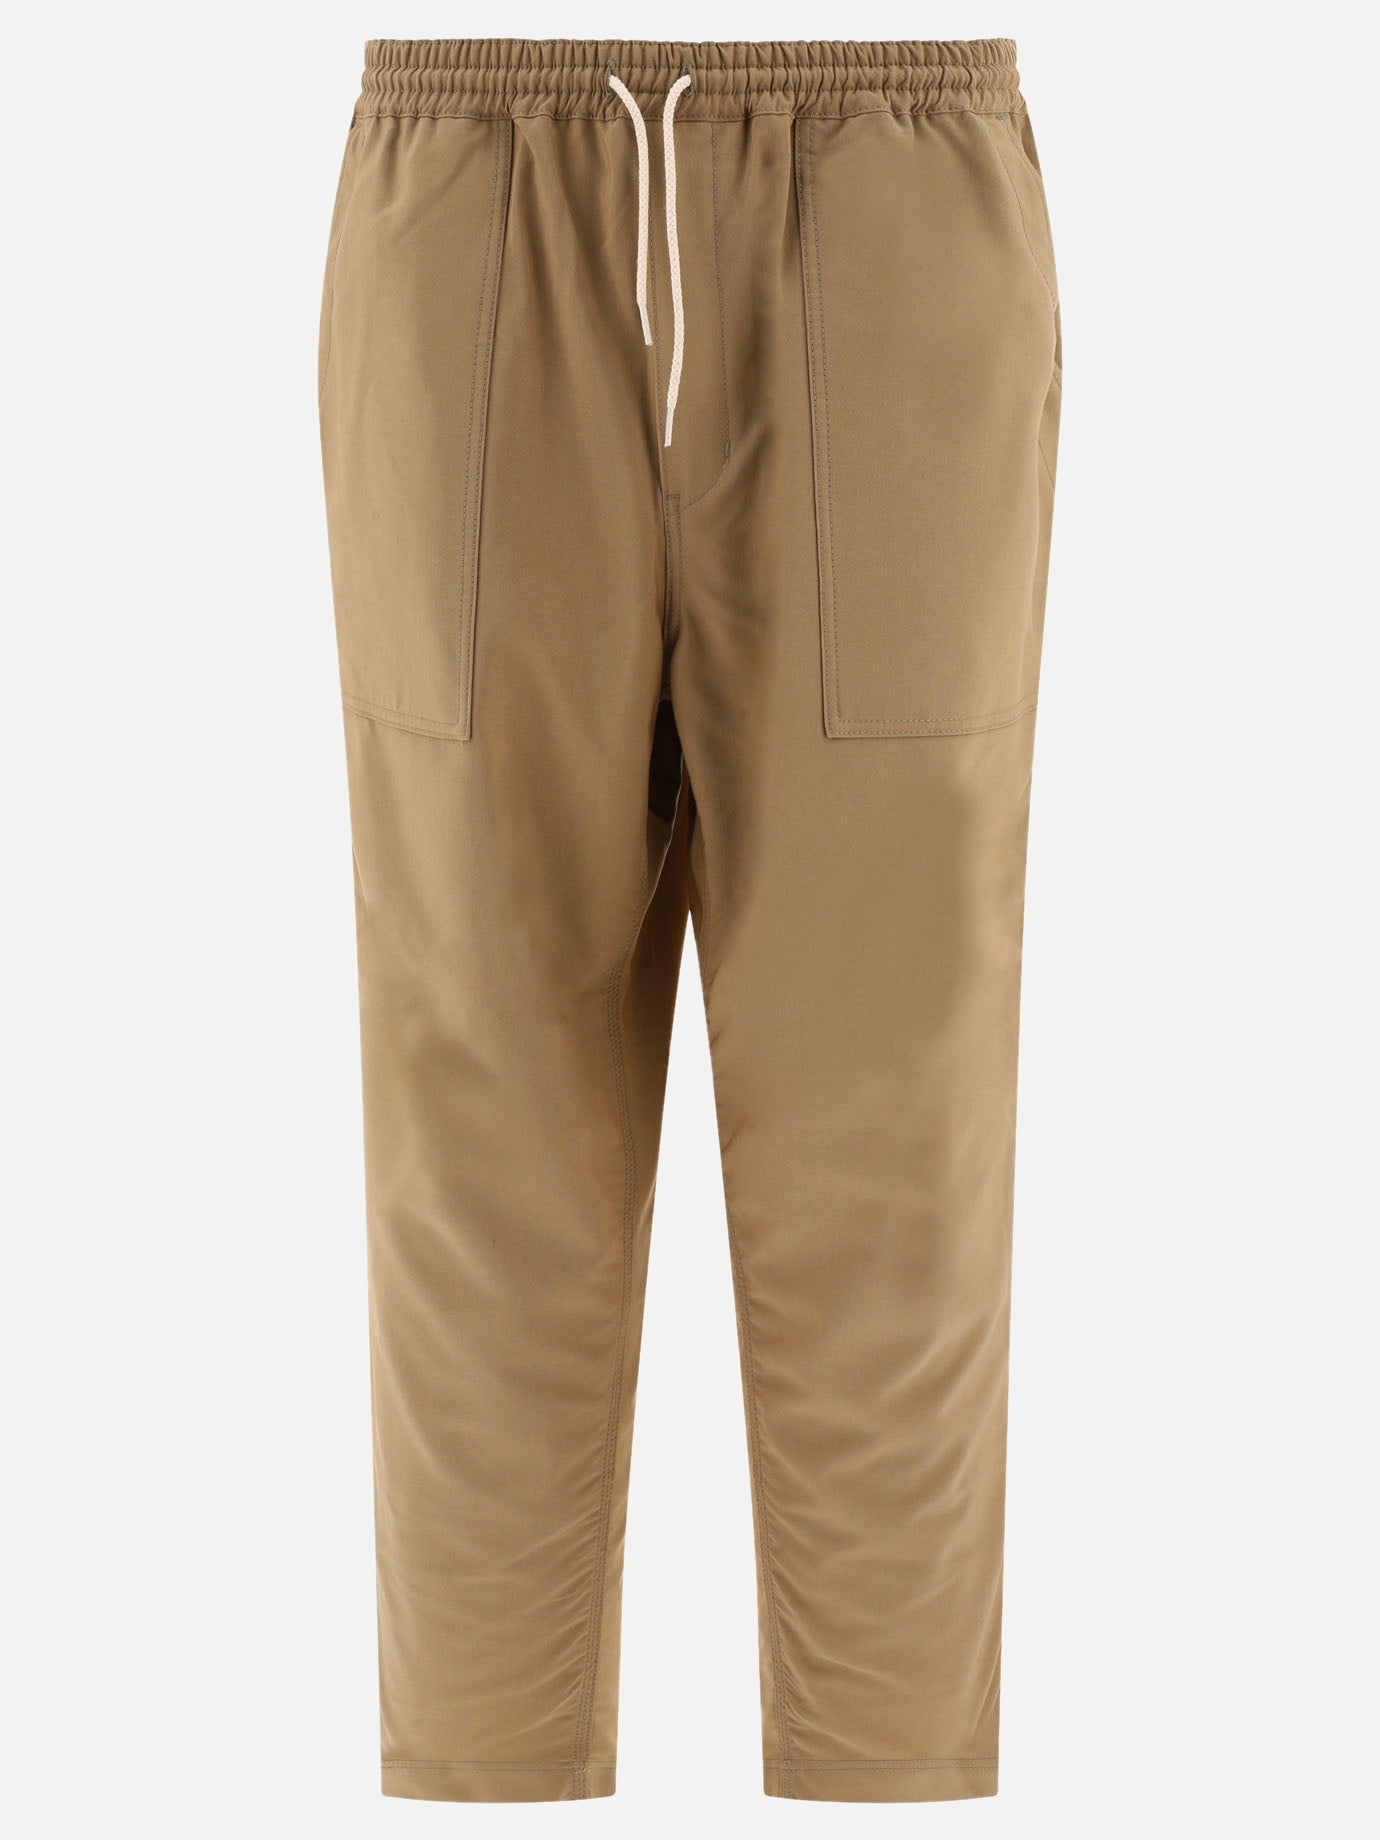 Trousers with drawstrings